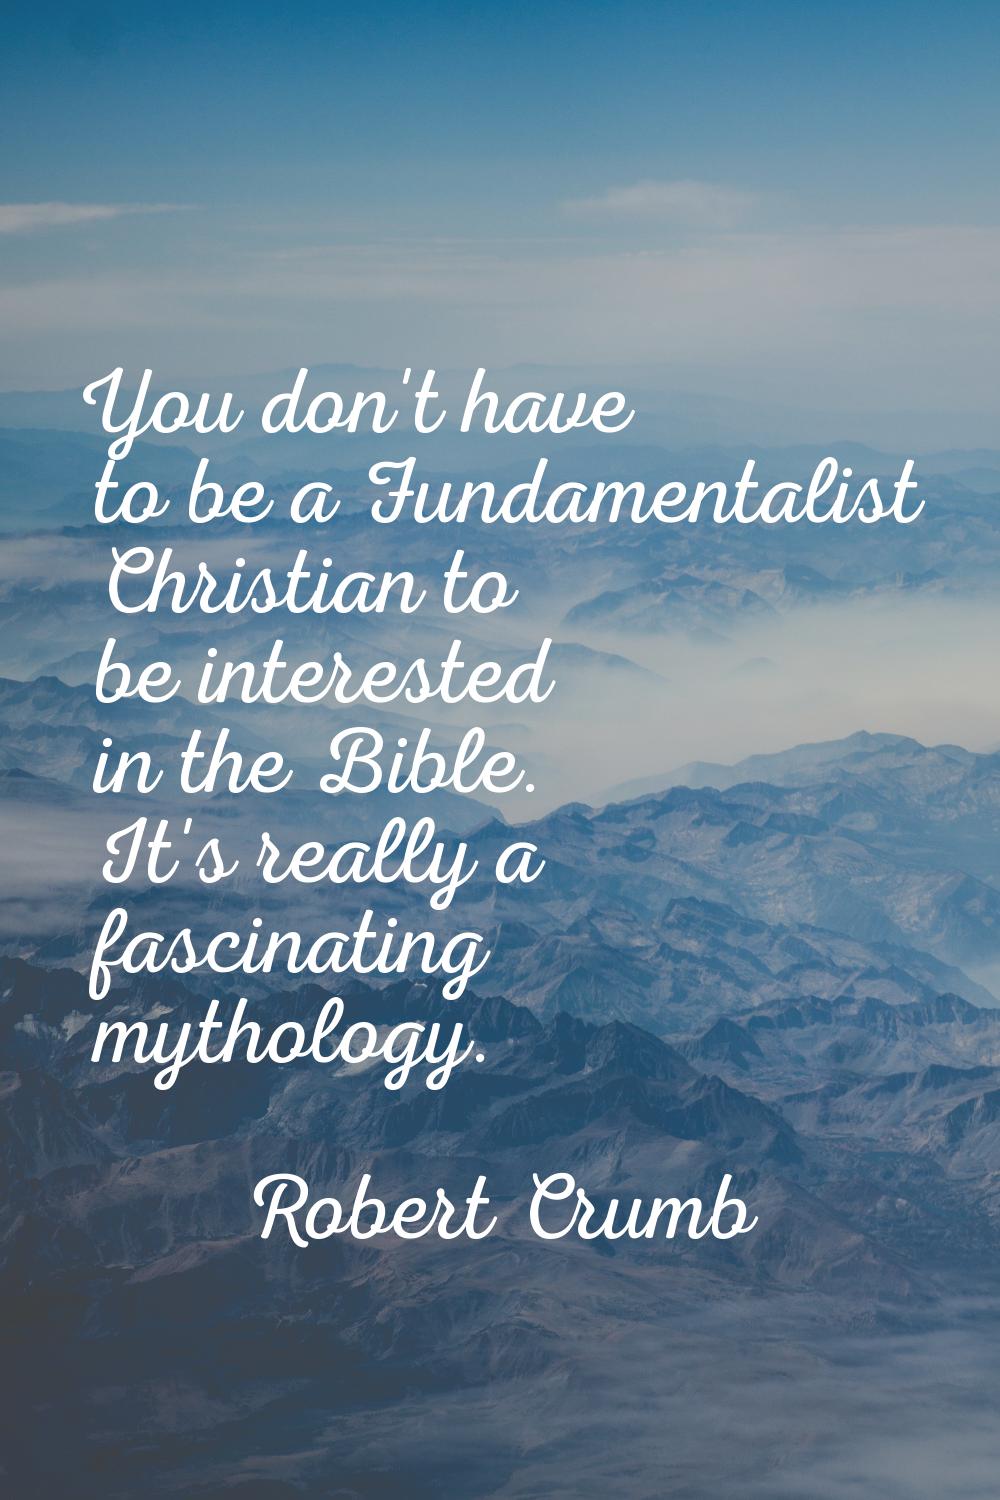 You don't have to be a Fundamentalist Christian to be interested in the Bible. It's really a fascin